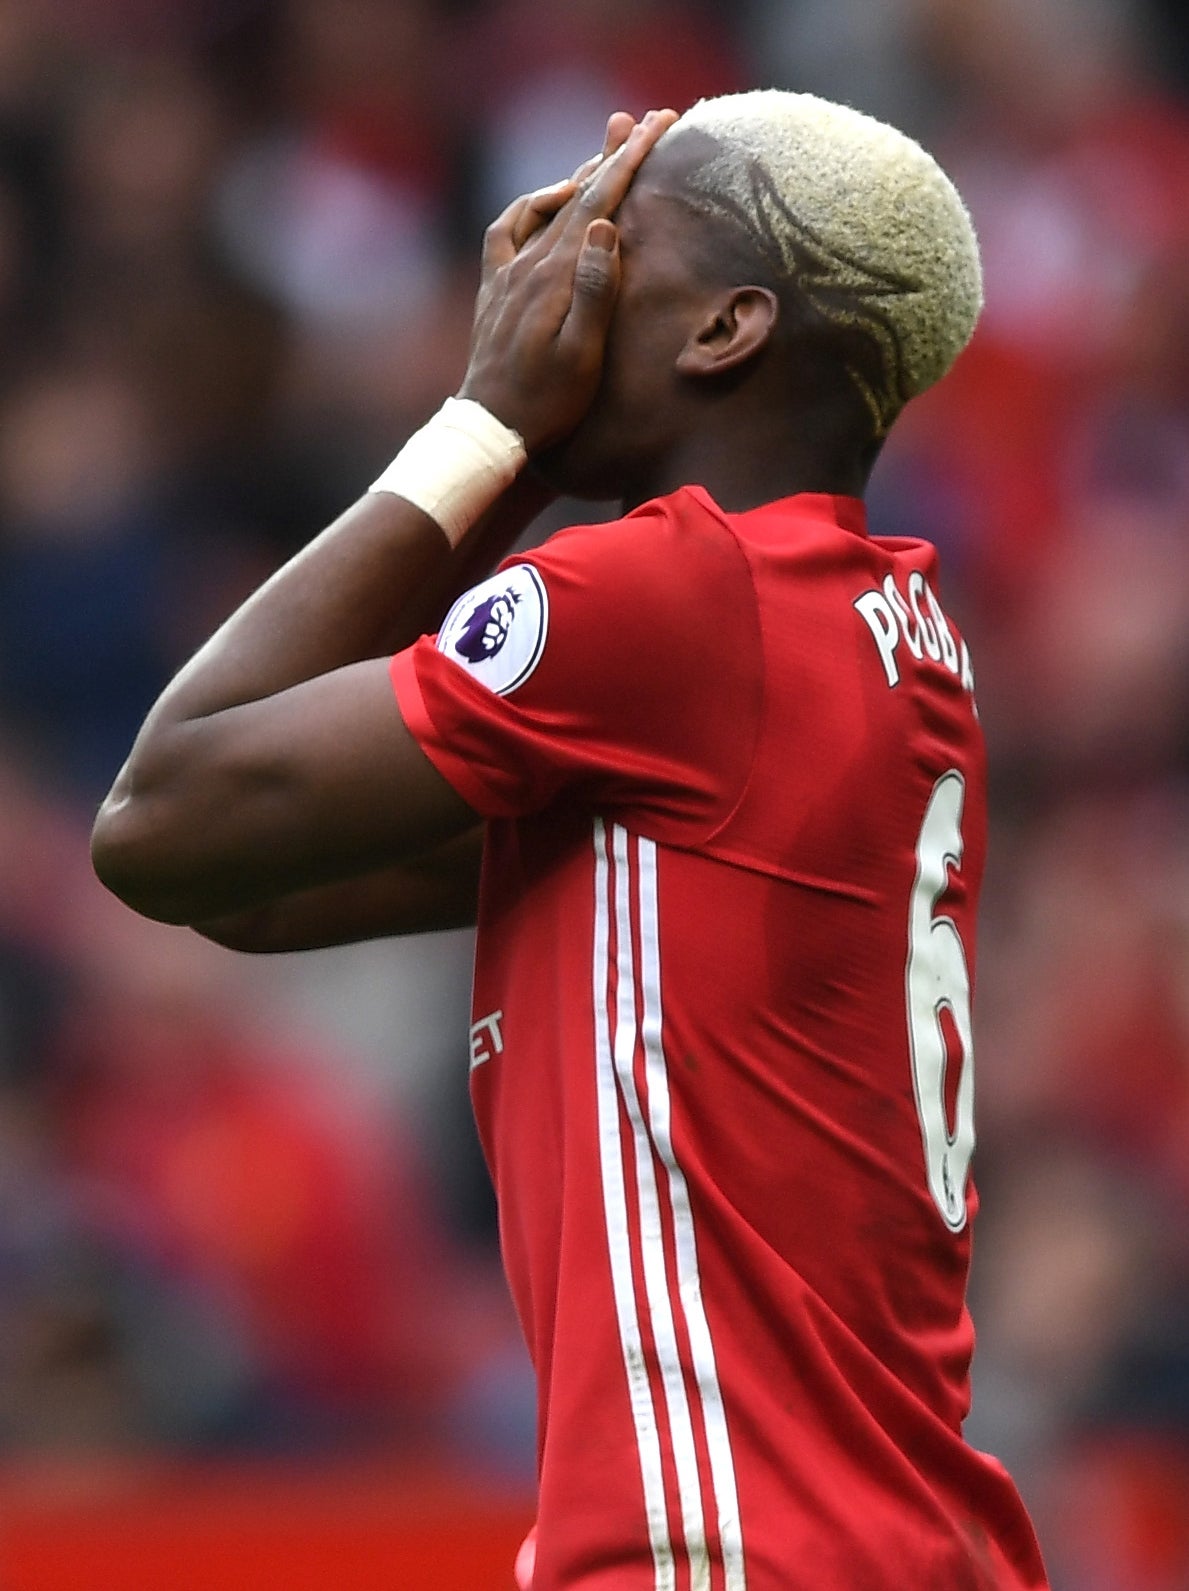 United's Pogba transfer is currently under investigation